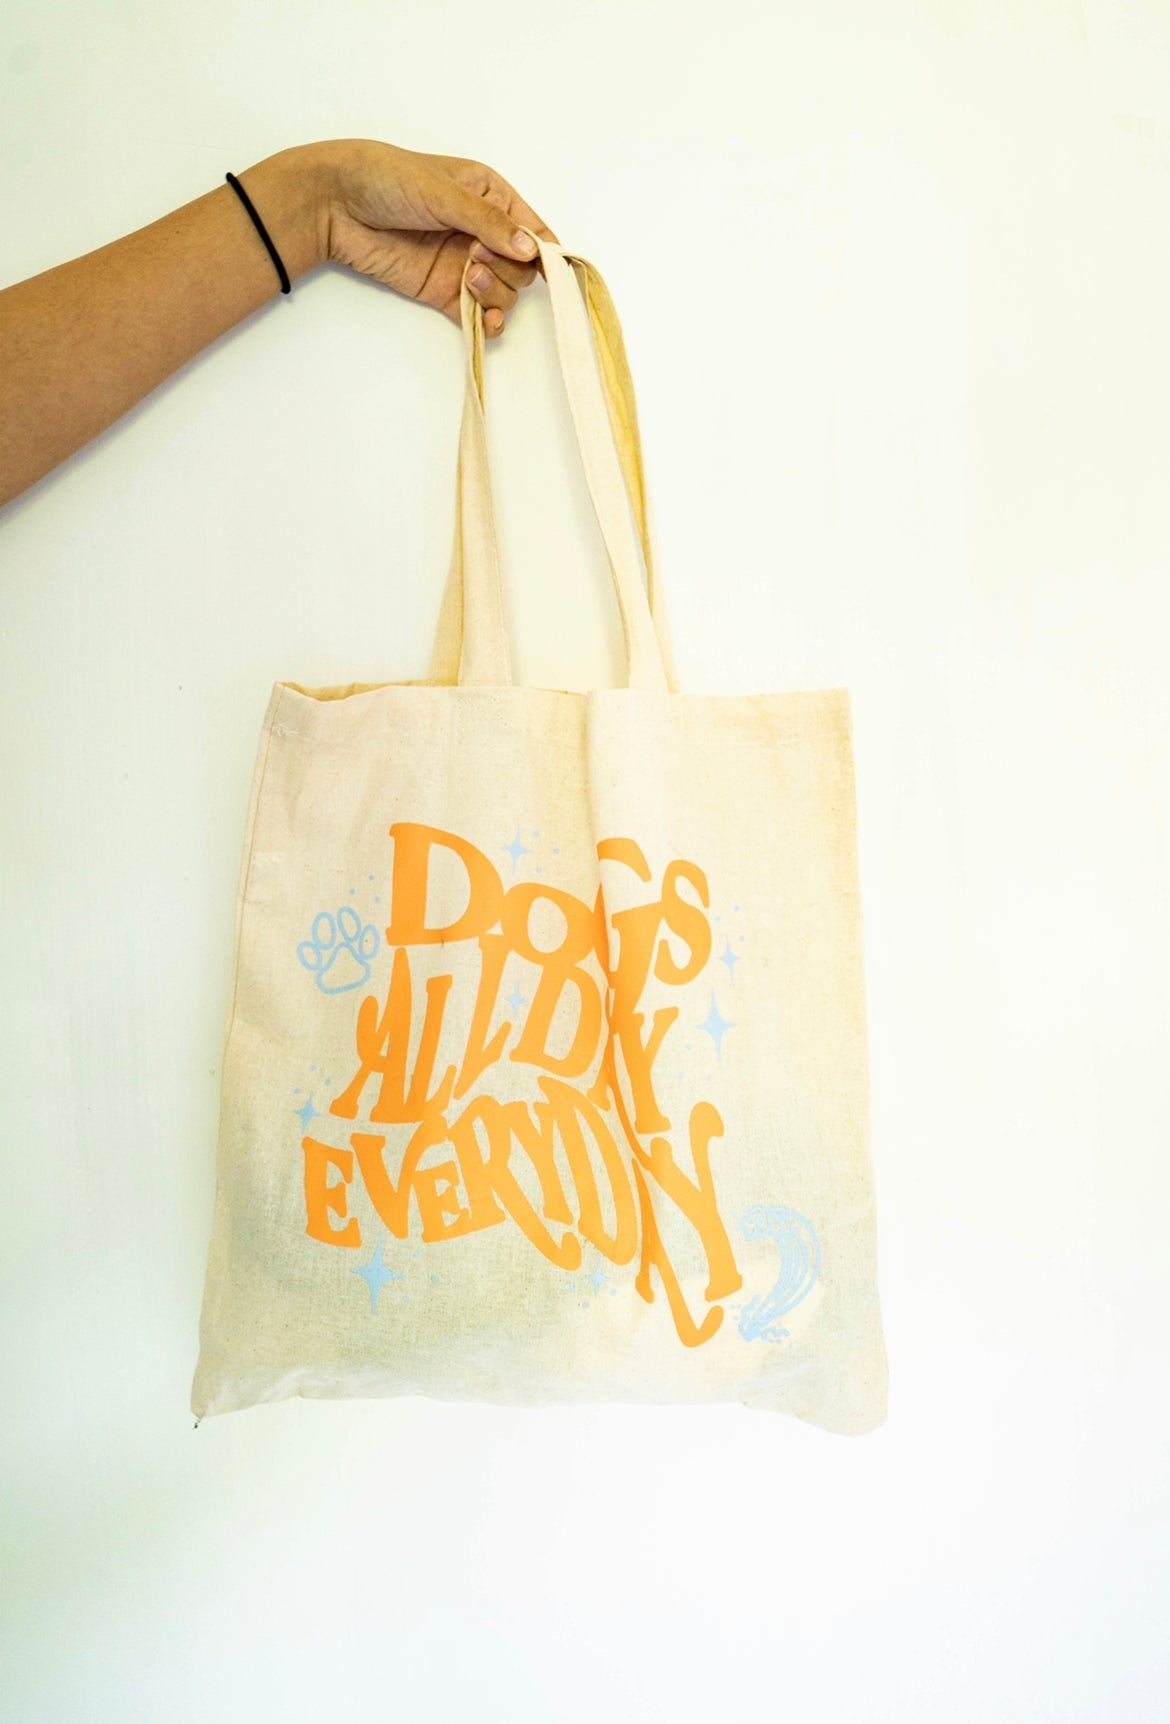 "Dogs All Day Everyday" Tote Bag